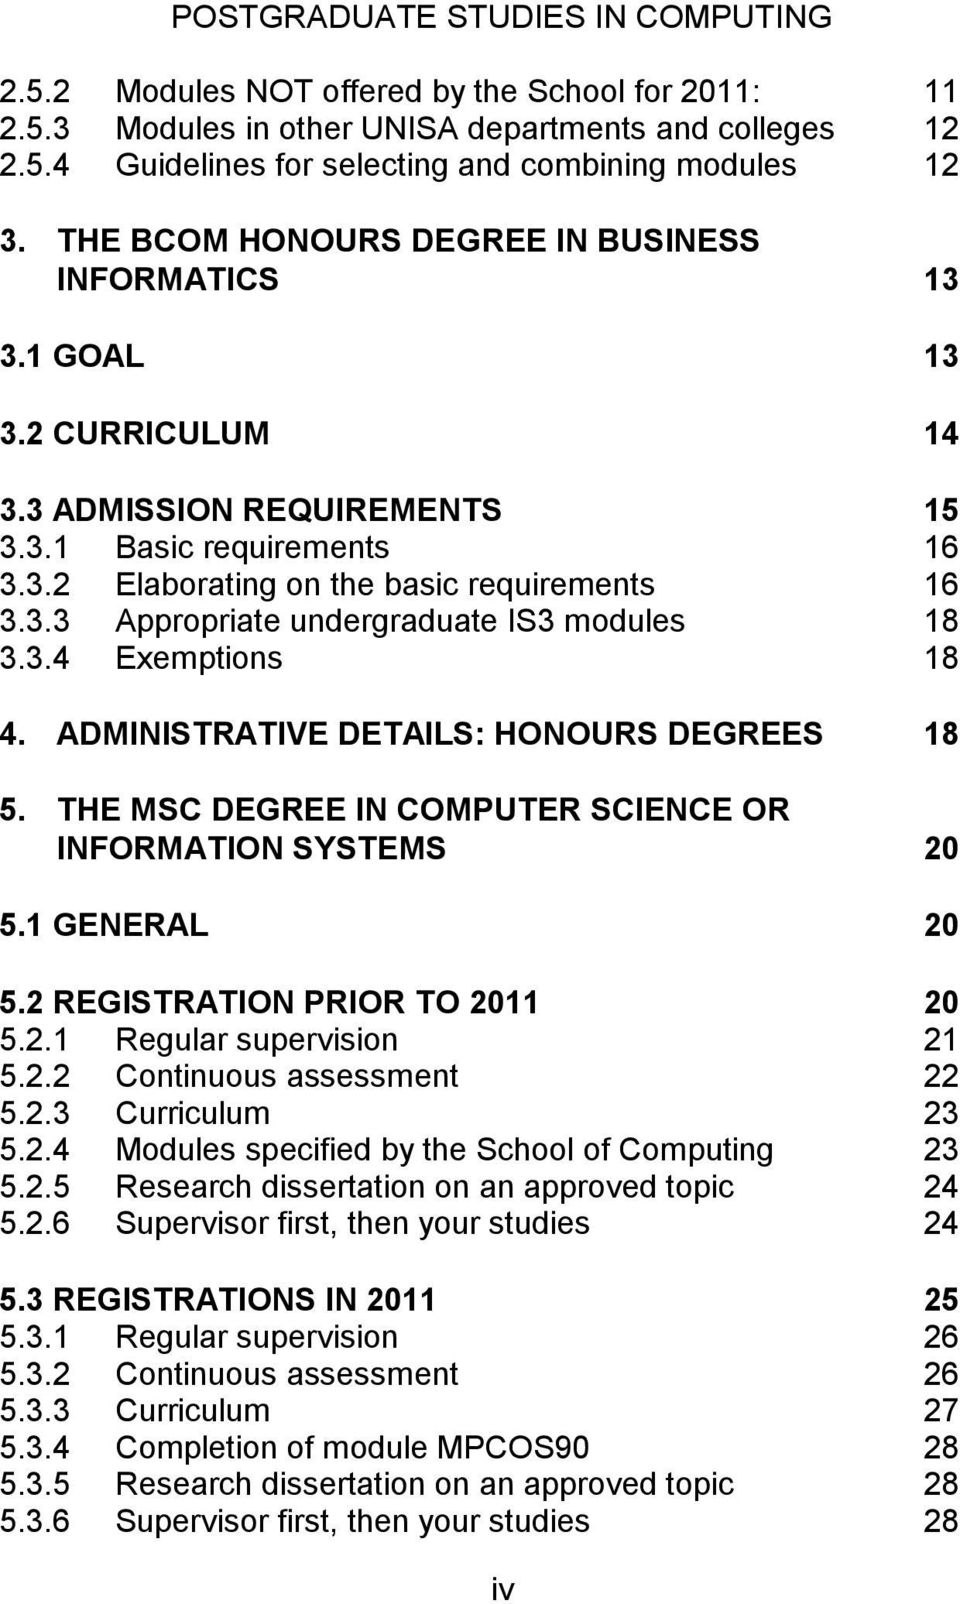 3.4 Exemptions 18 4. ADMINISTRATIVE DETAILS: HONOURS DEGREES 18 5. THE MSC DEGREE IN COMPUTER SCIENCE OR INFORMATION SYSTEMS 20 5.1 GENERAL 20 5.2 REGISTRATION PRIOR TO 2011 20 5.2.1 Regular supervision 21 5.